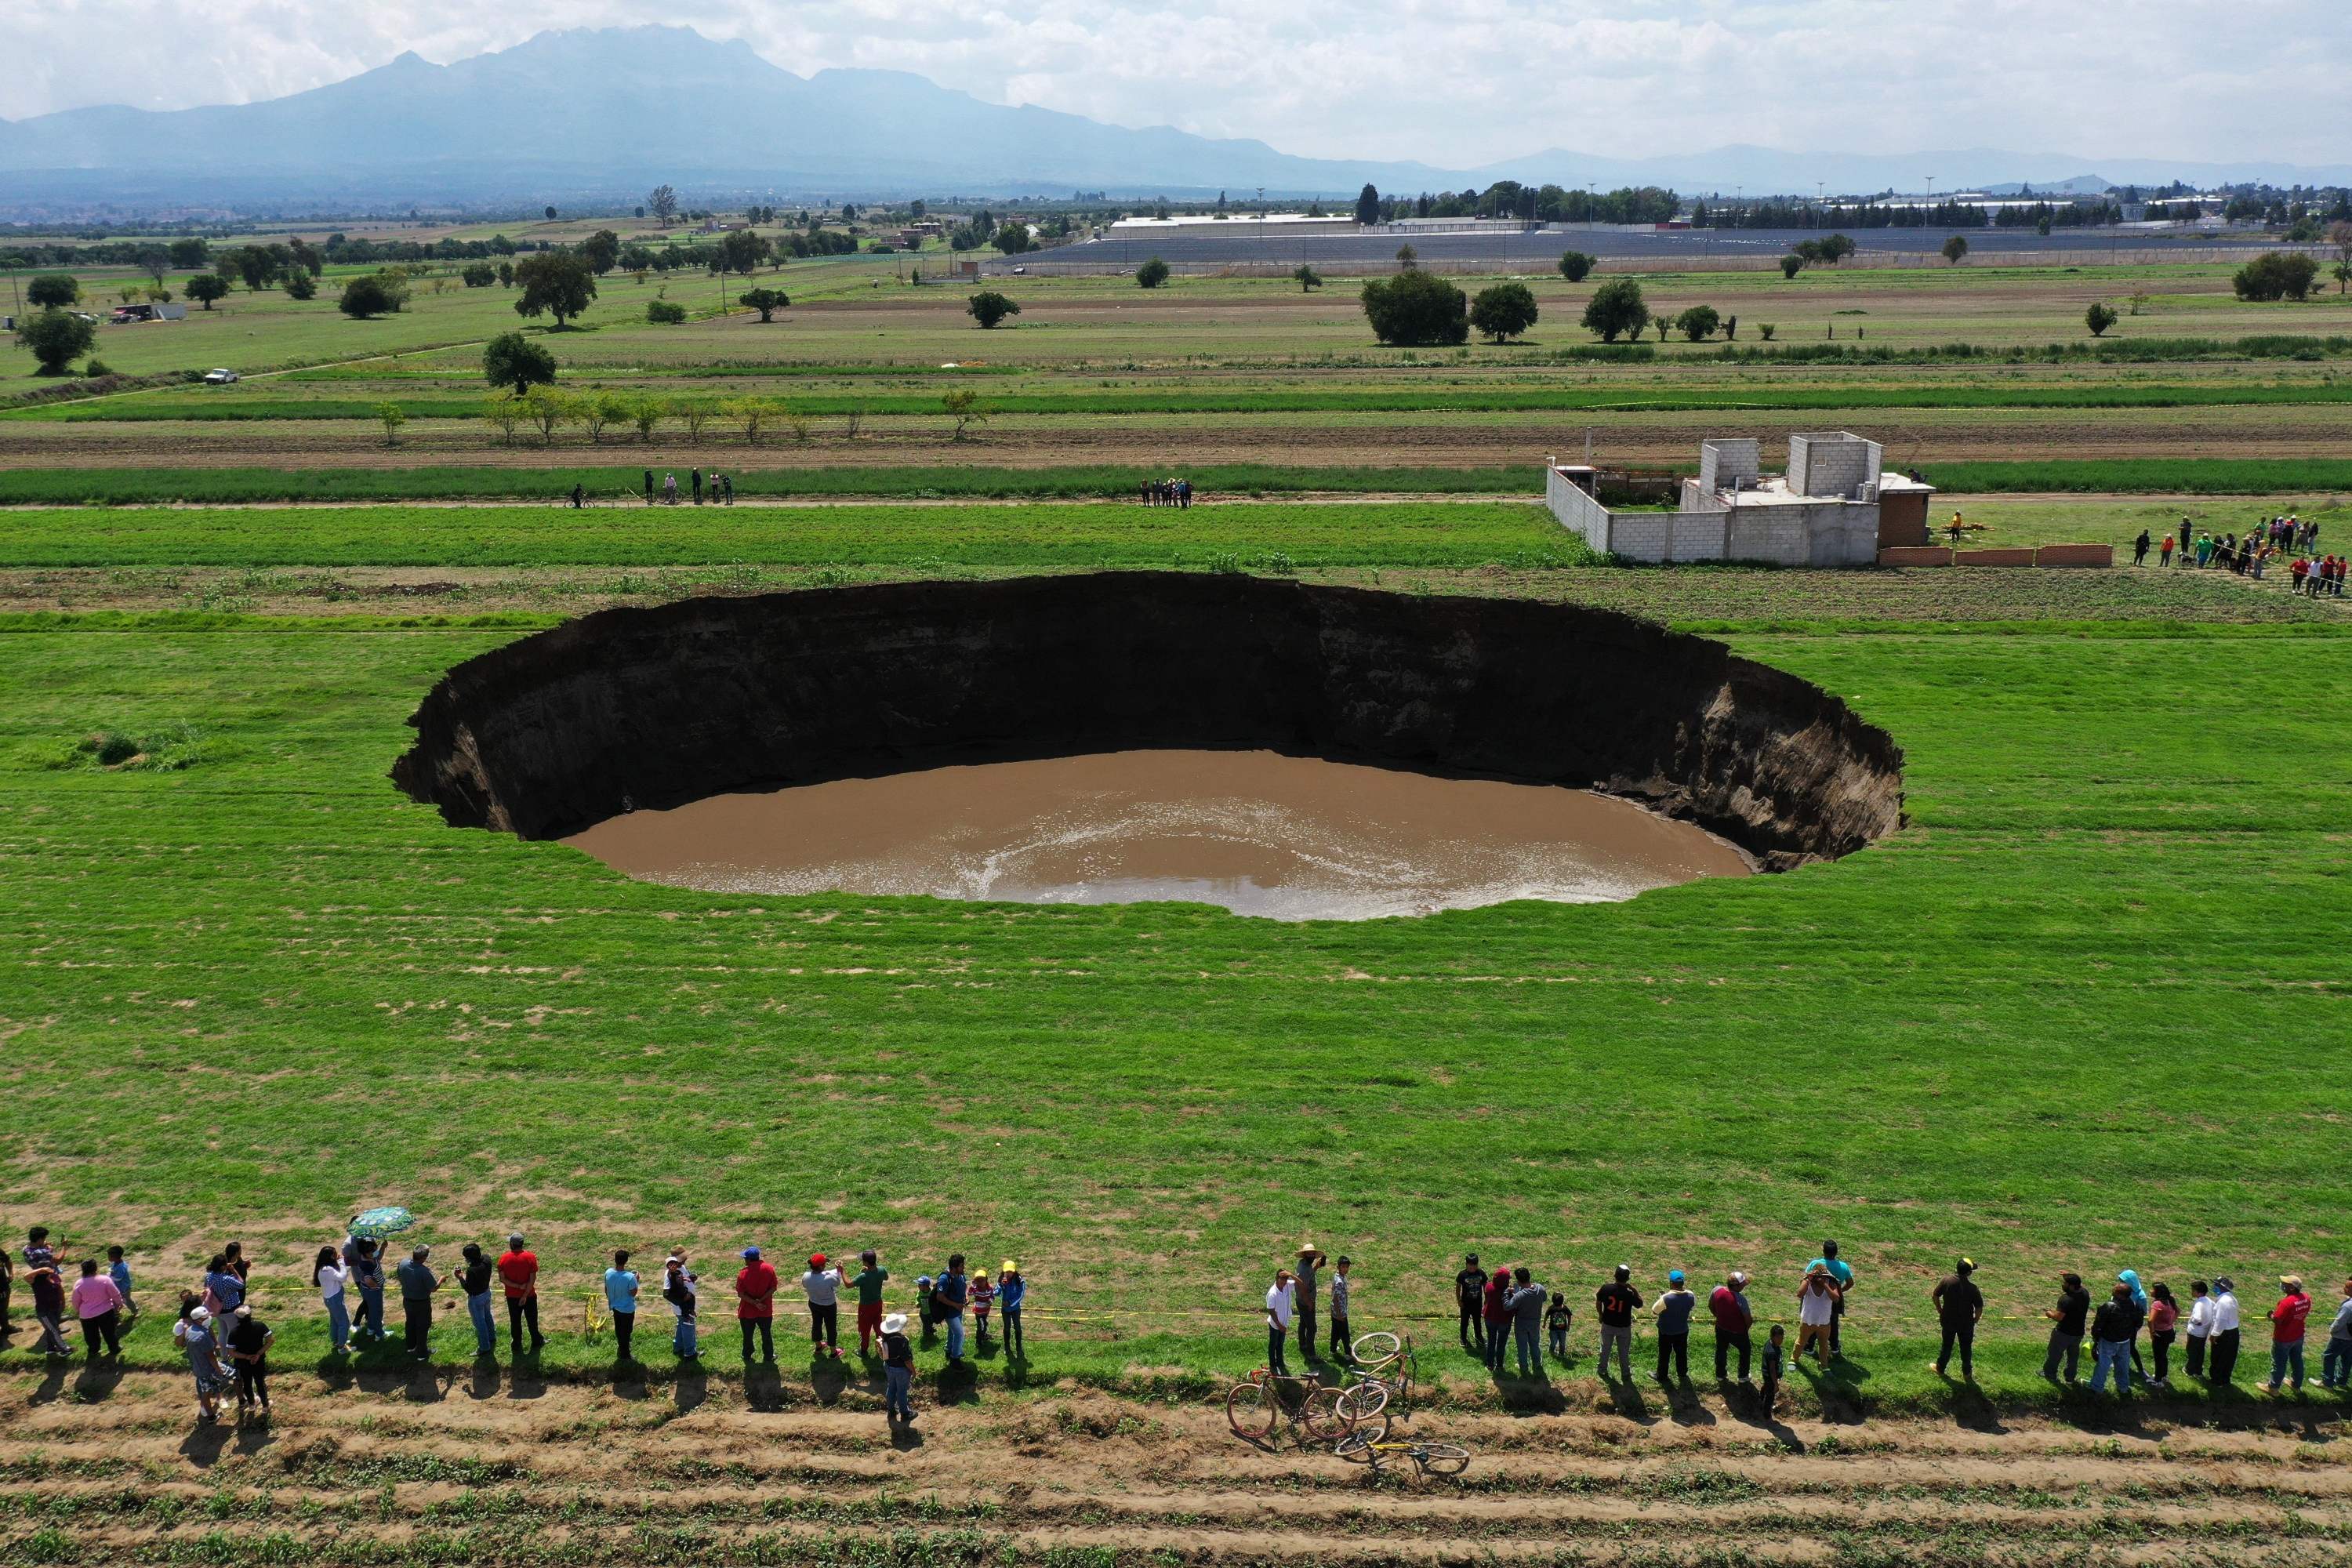 Locals have been coming to the site in large number to witness the expanding sinkhole